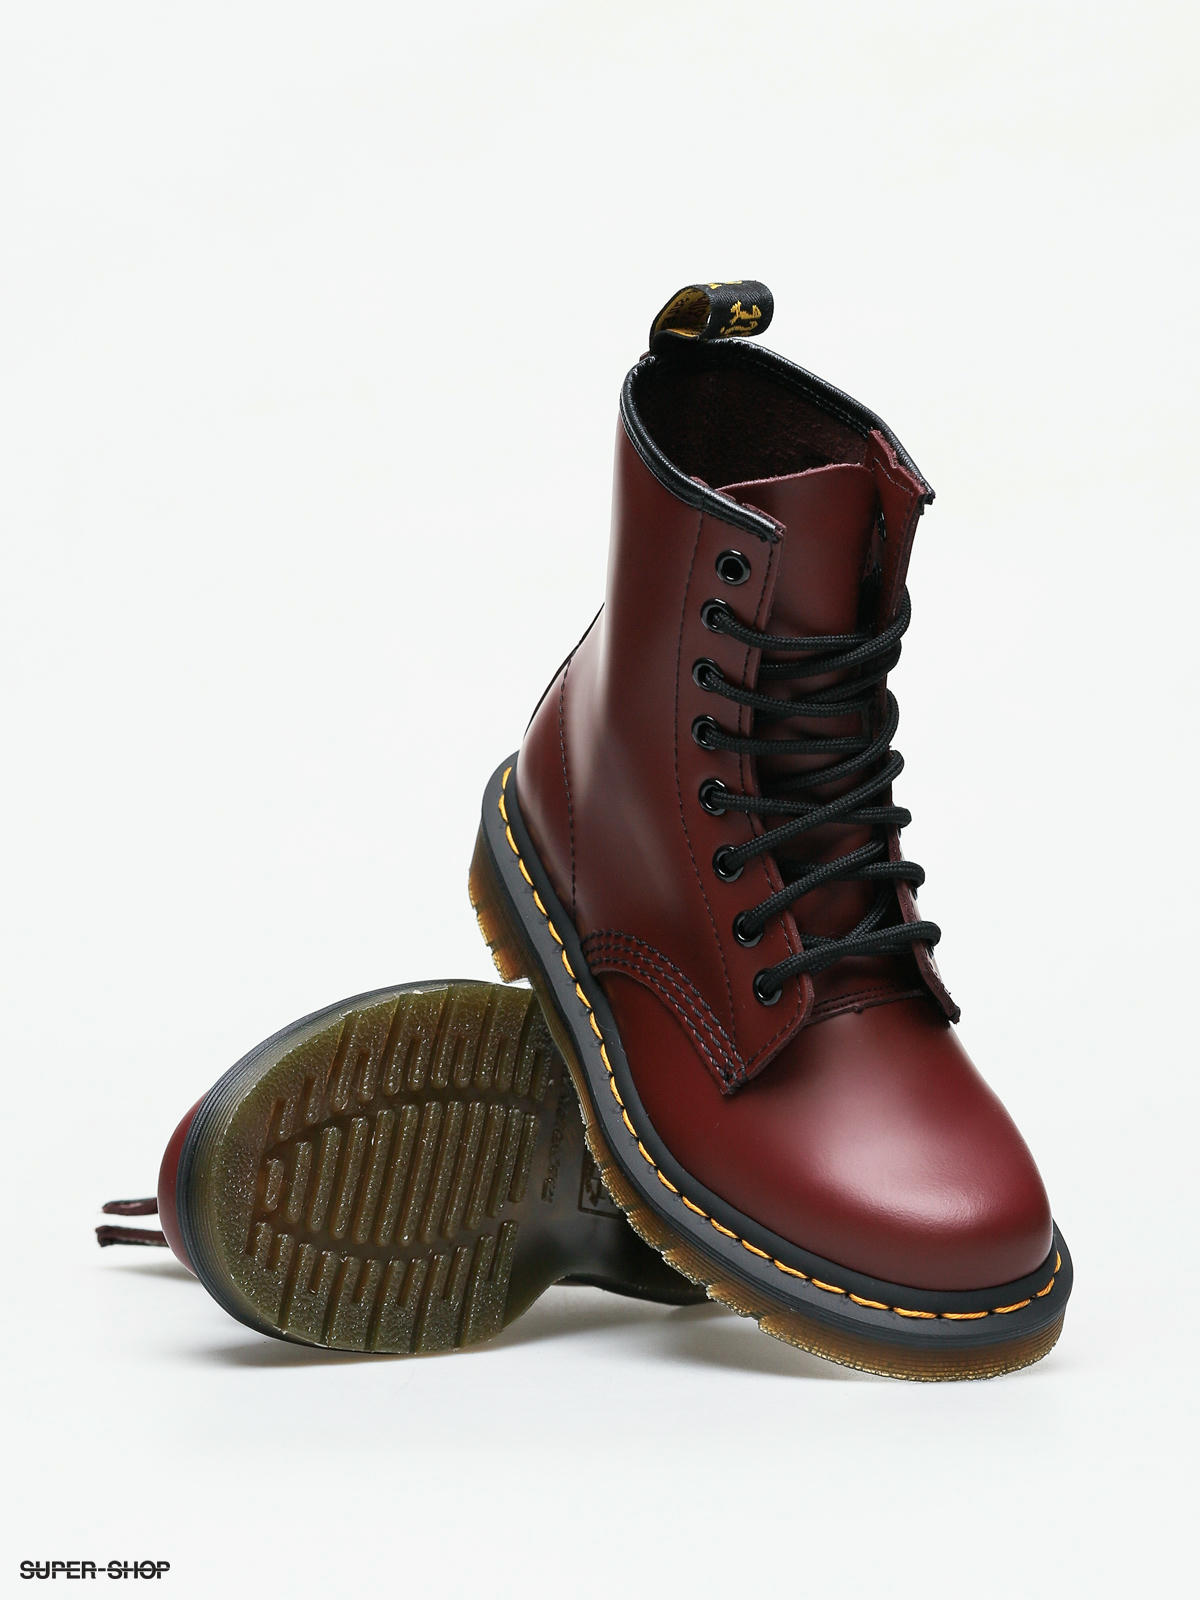 Dr. Martens 1460 Shoes (cherry red smooth)